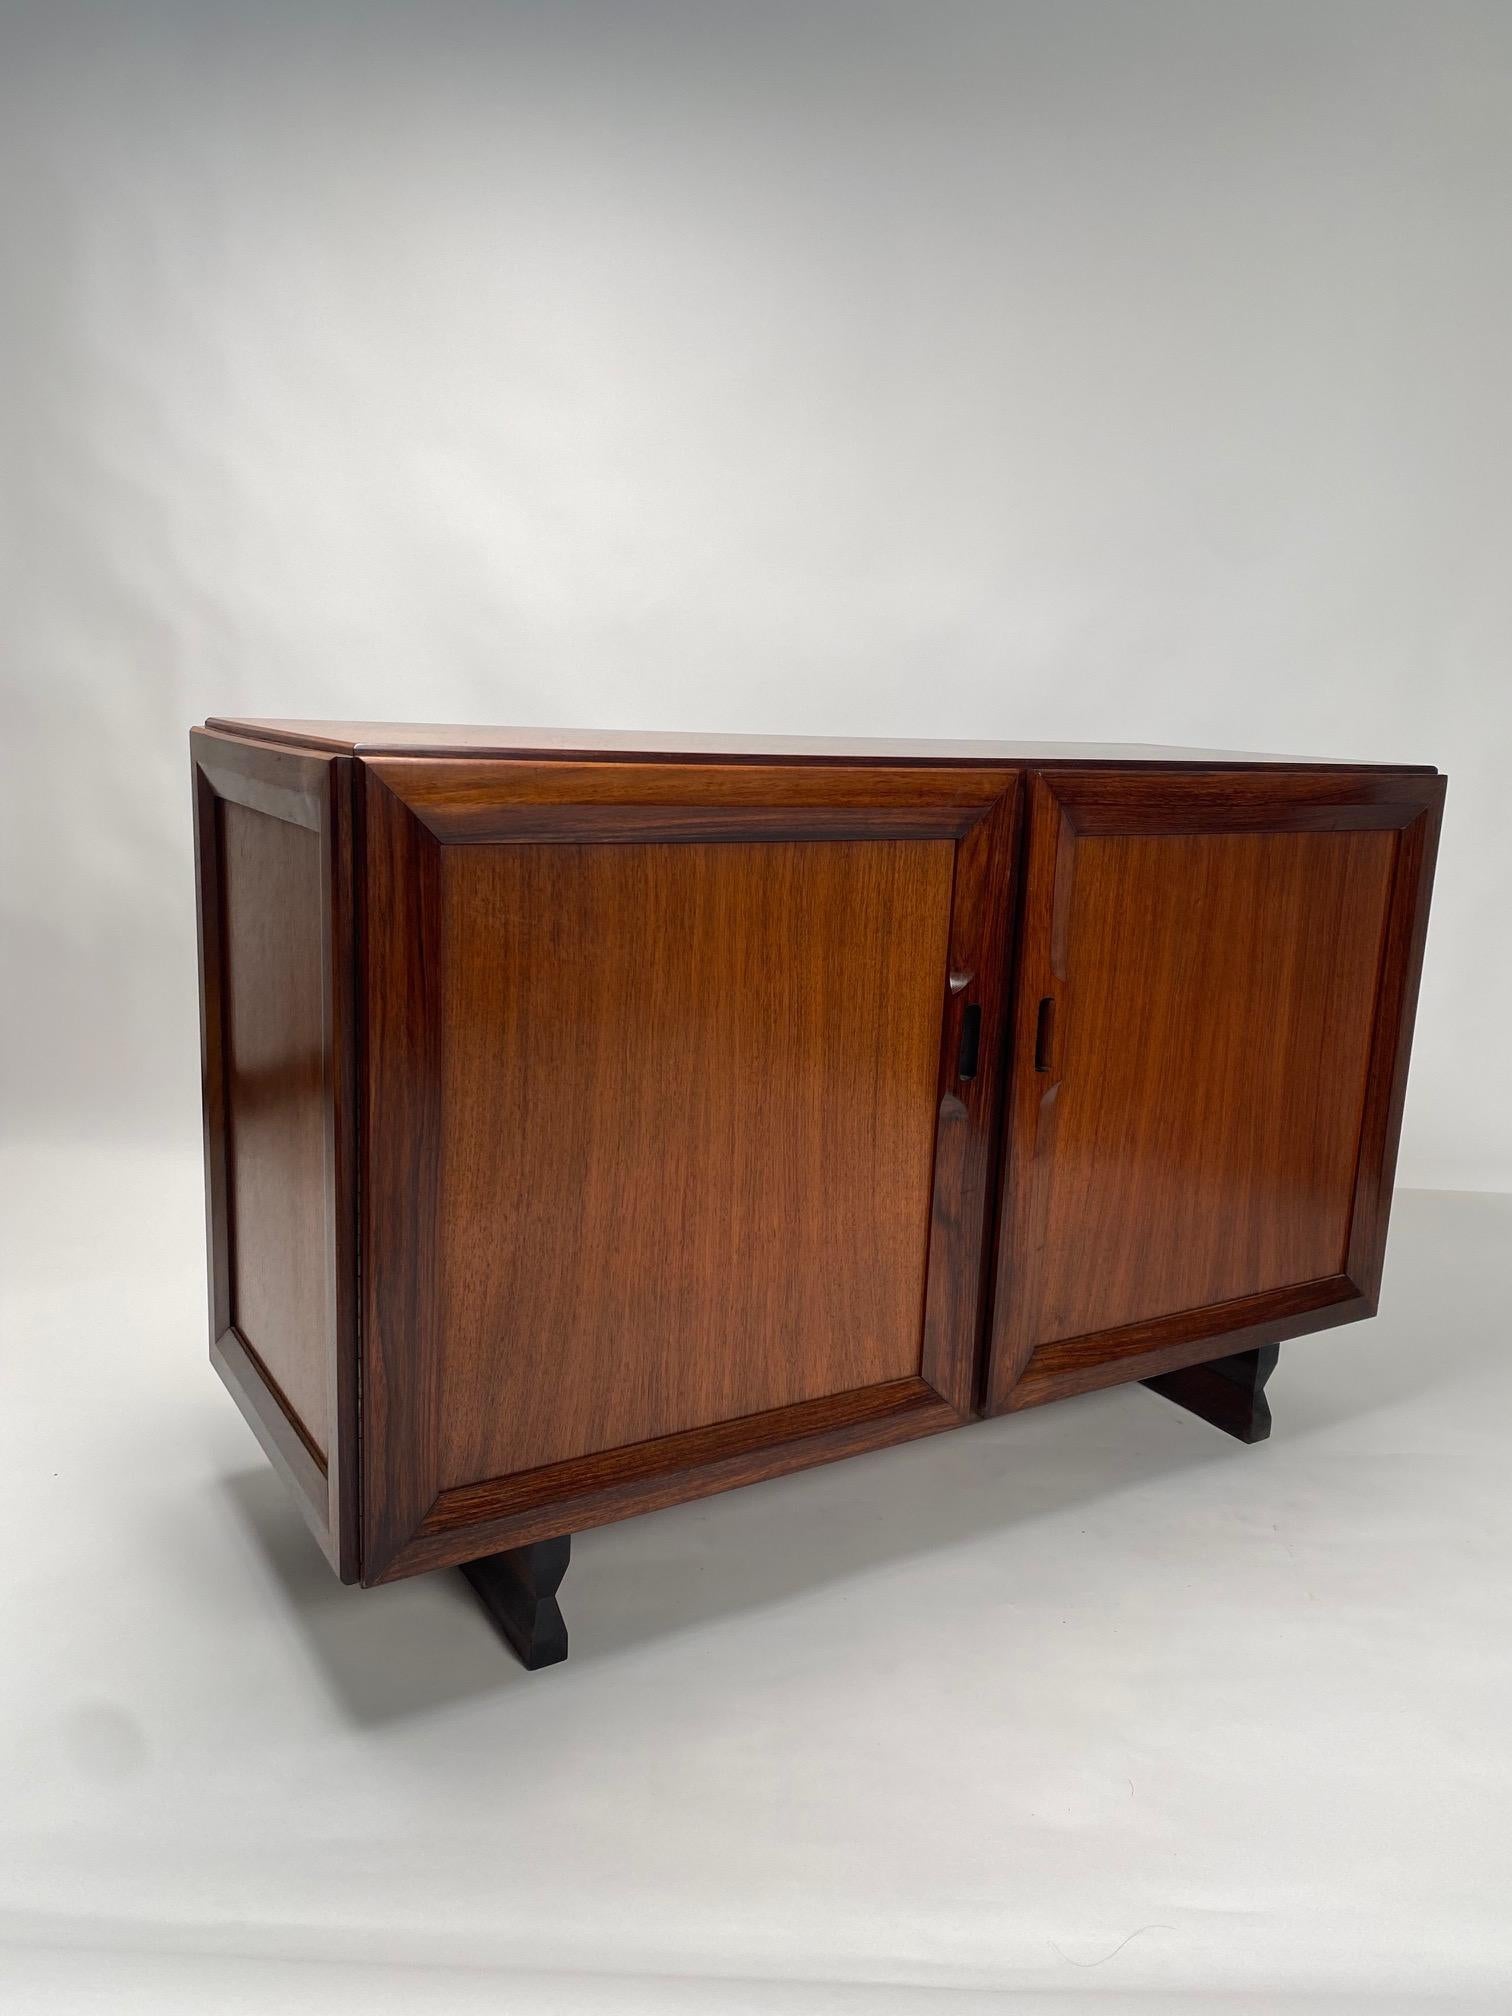 Franco Albini, MB15 sideboard for Poggi, Italy 1957

The two cabinets are one of the most iconic and representative projects of the famous Italian architect and designer Franco Albini and of his style, defined by some critics as 